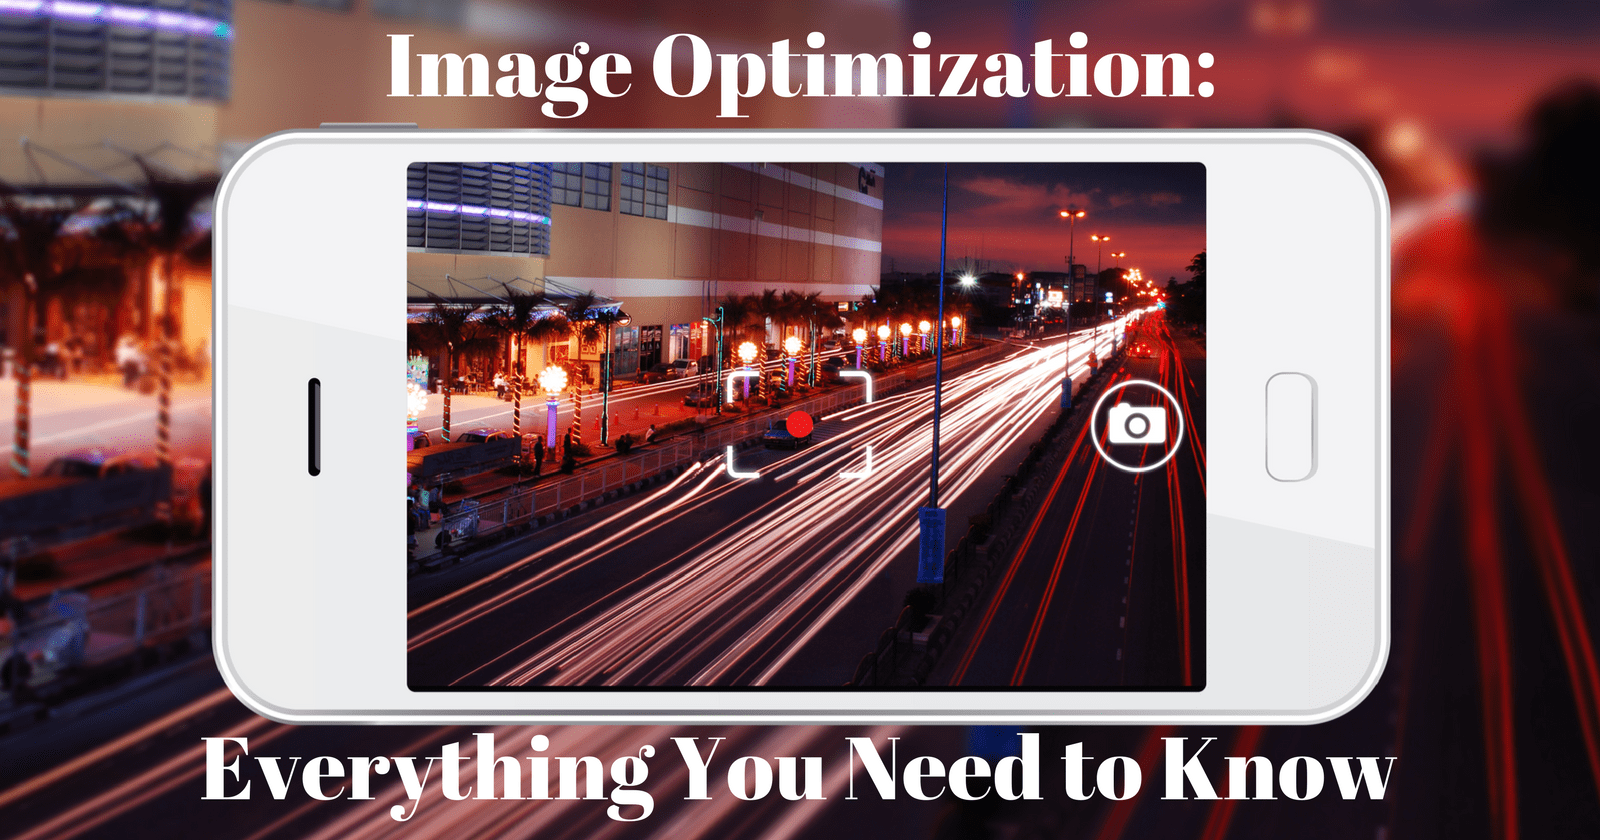 14 Image Optimization Tips You Need to Know